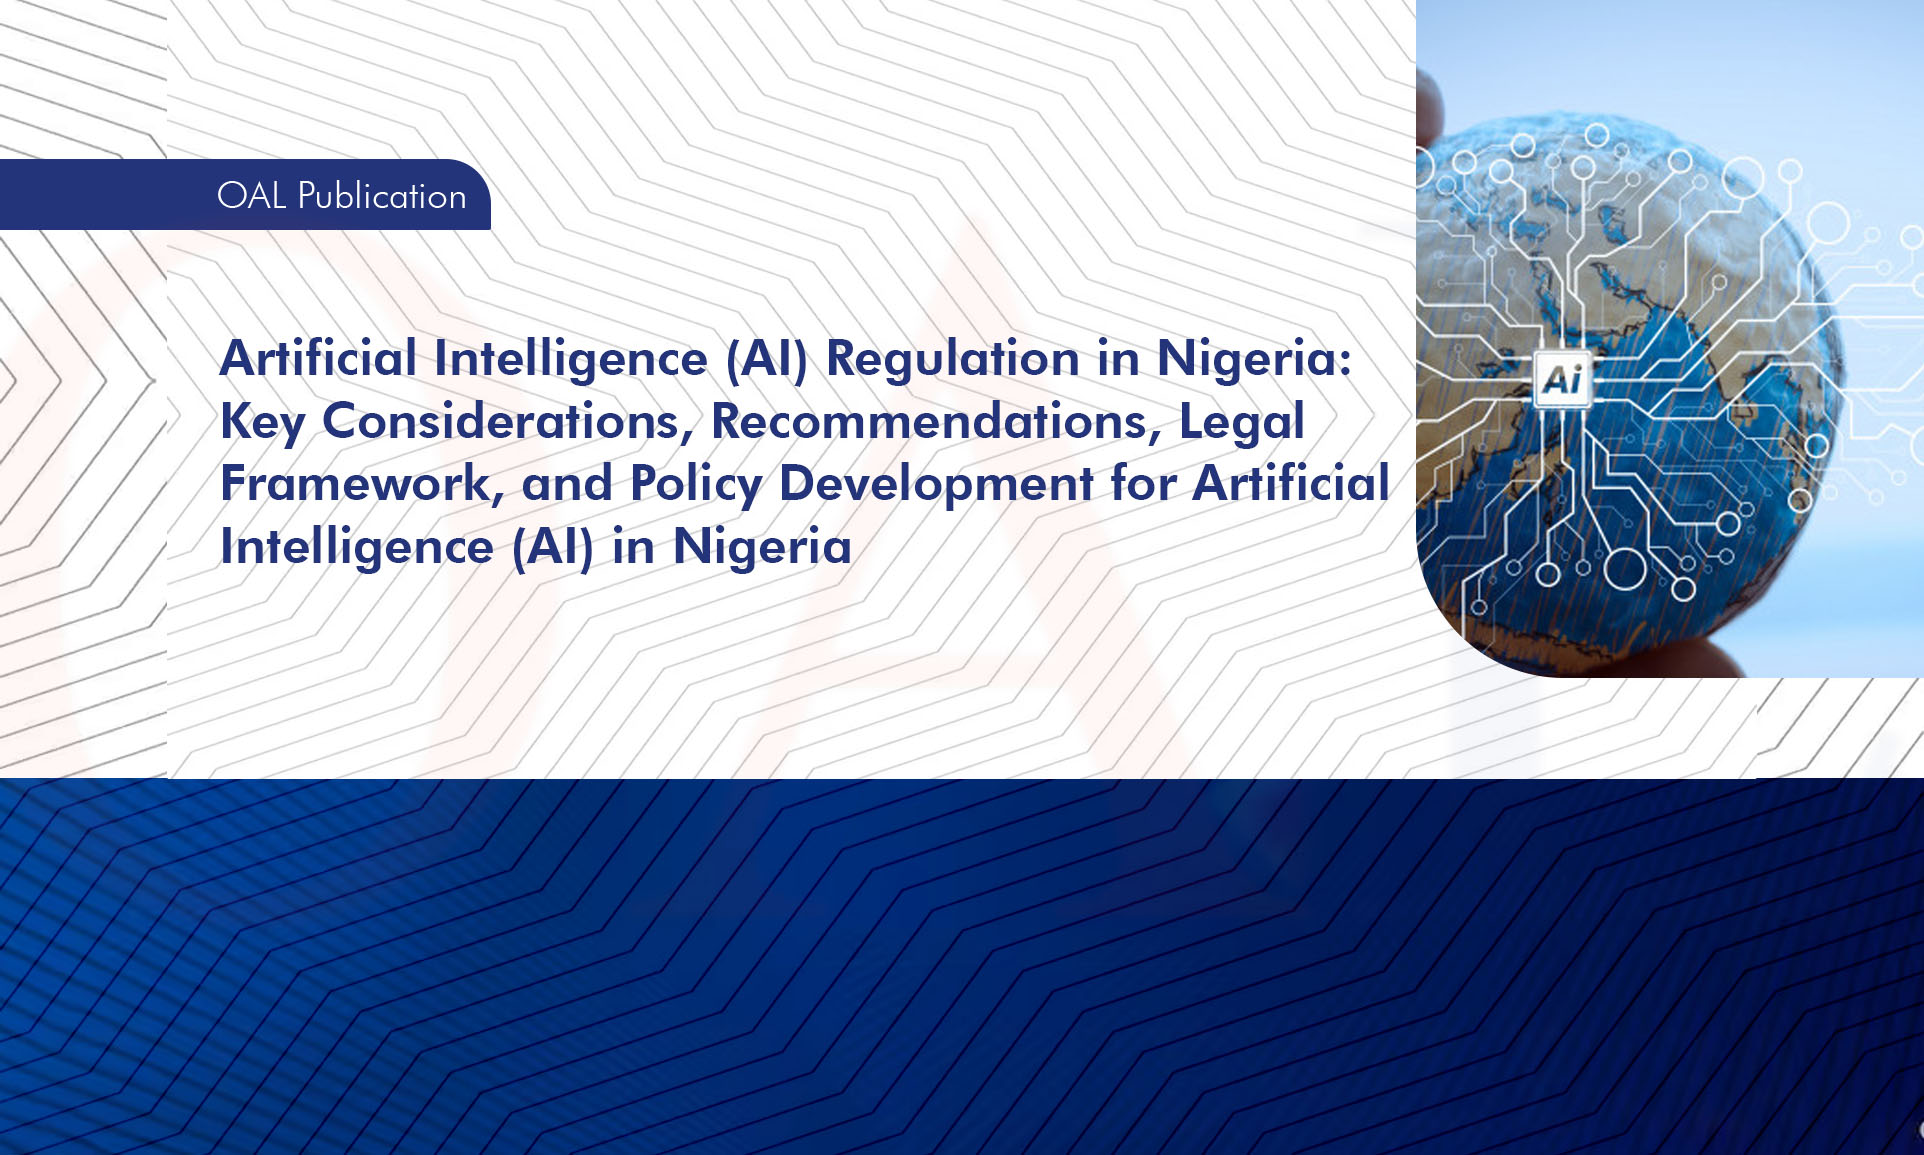 Artificial Intelligence (AI) Regulation in Nigeria - Key Considerations, Recommendations, Legal Framework, and Policy Development for Artificial Intelligence (AI) in Nigeria